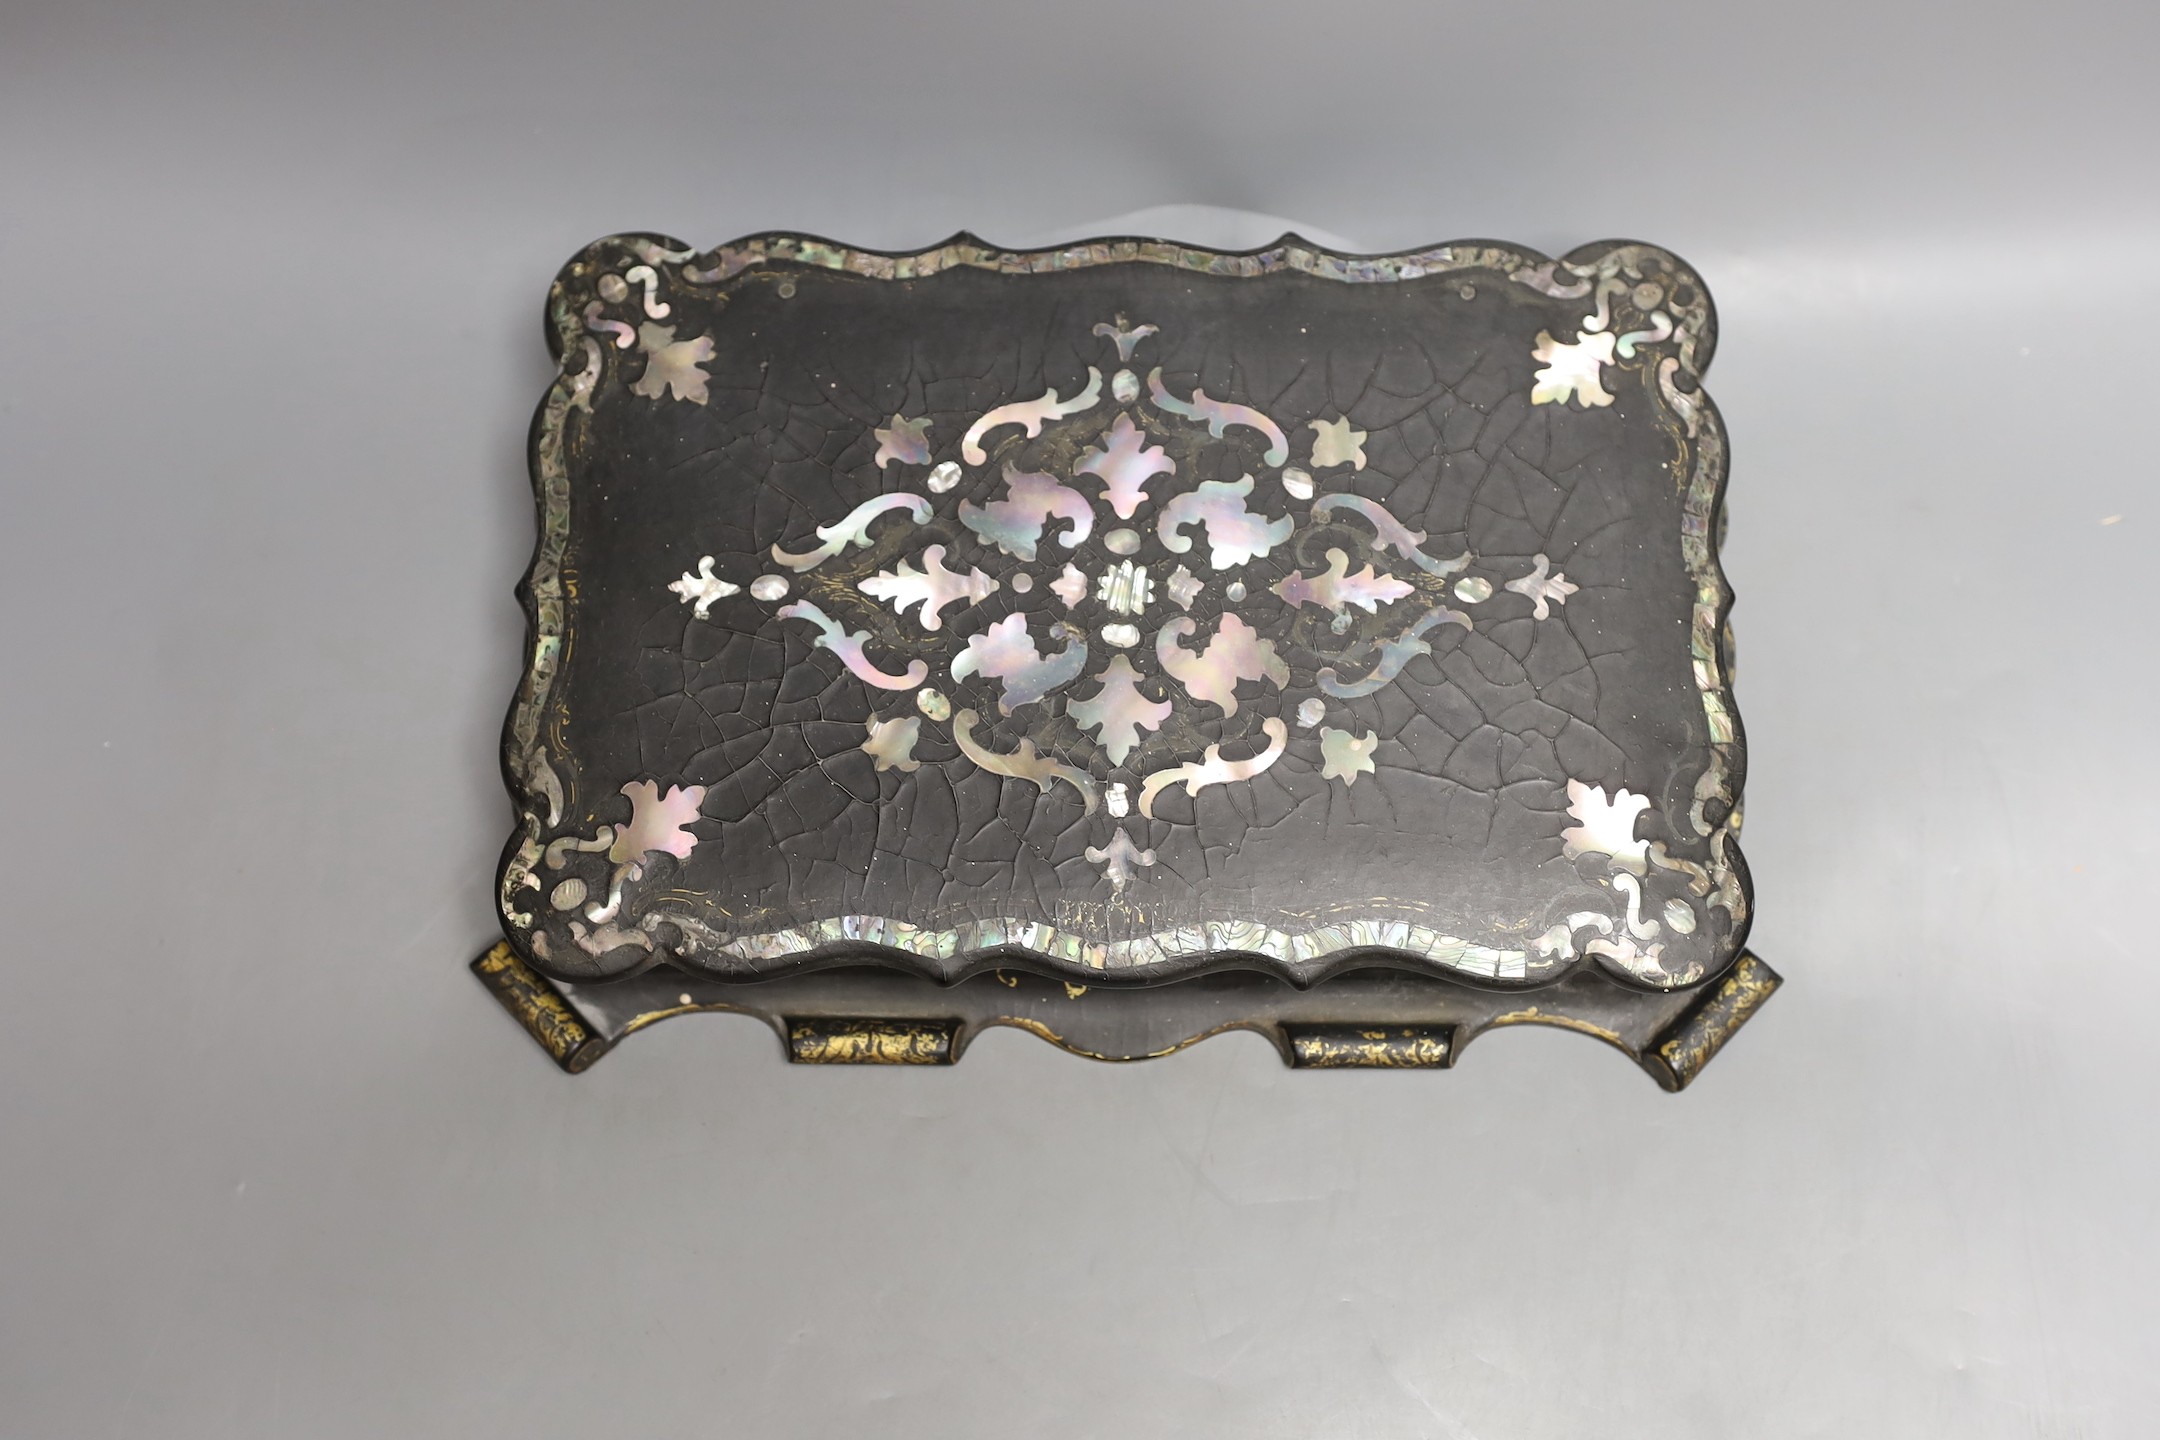 A Victorian papier-mâché games box with mother of pearl inlay and mother-of-pearl counters